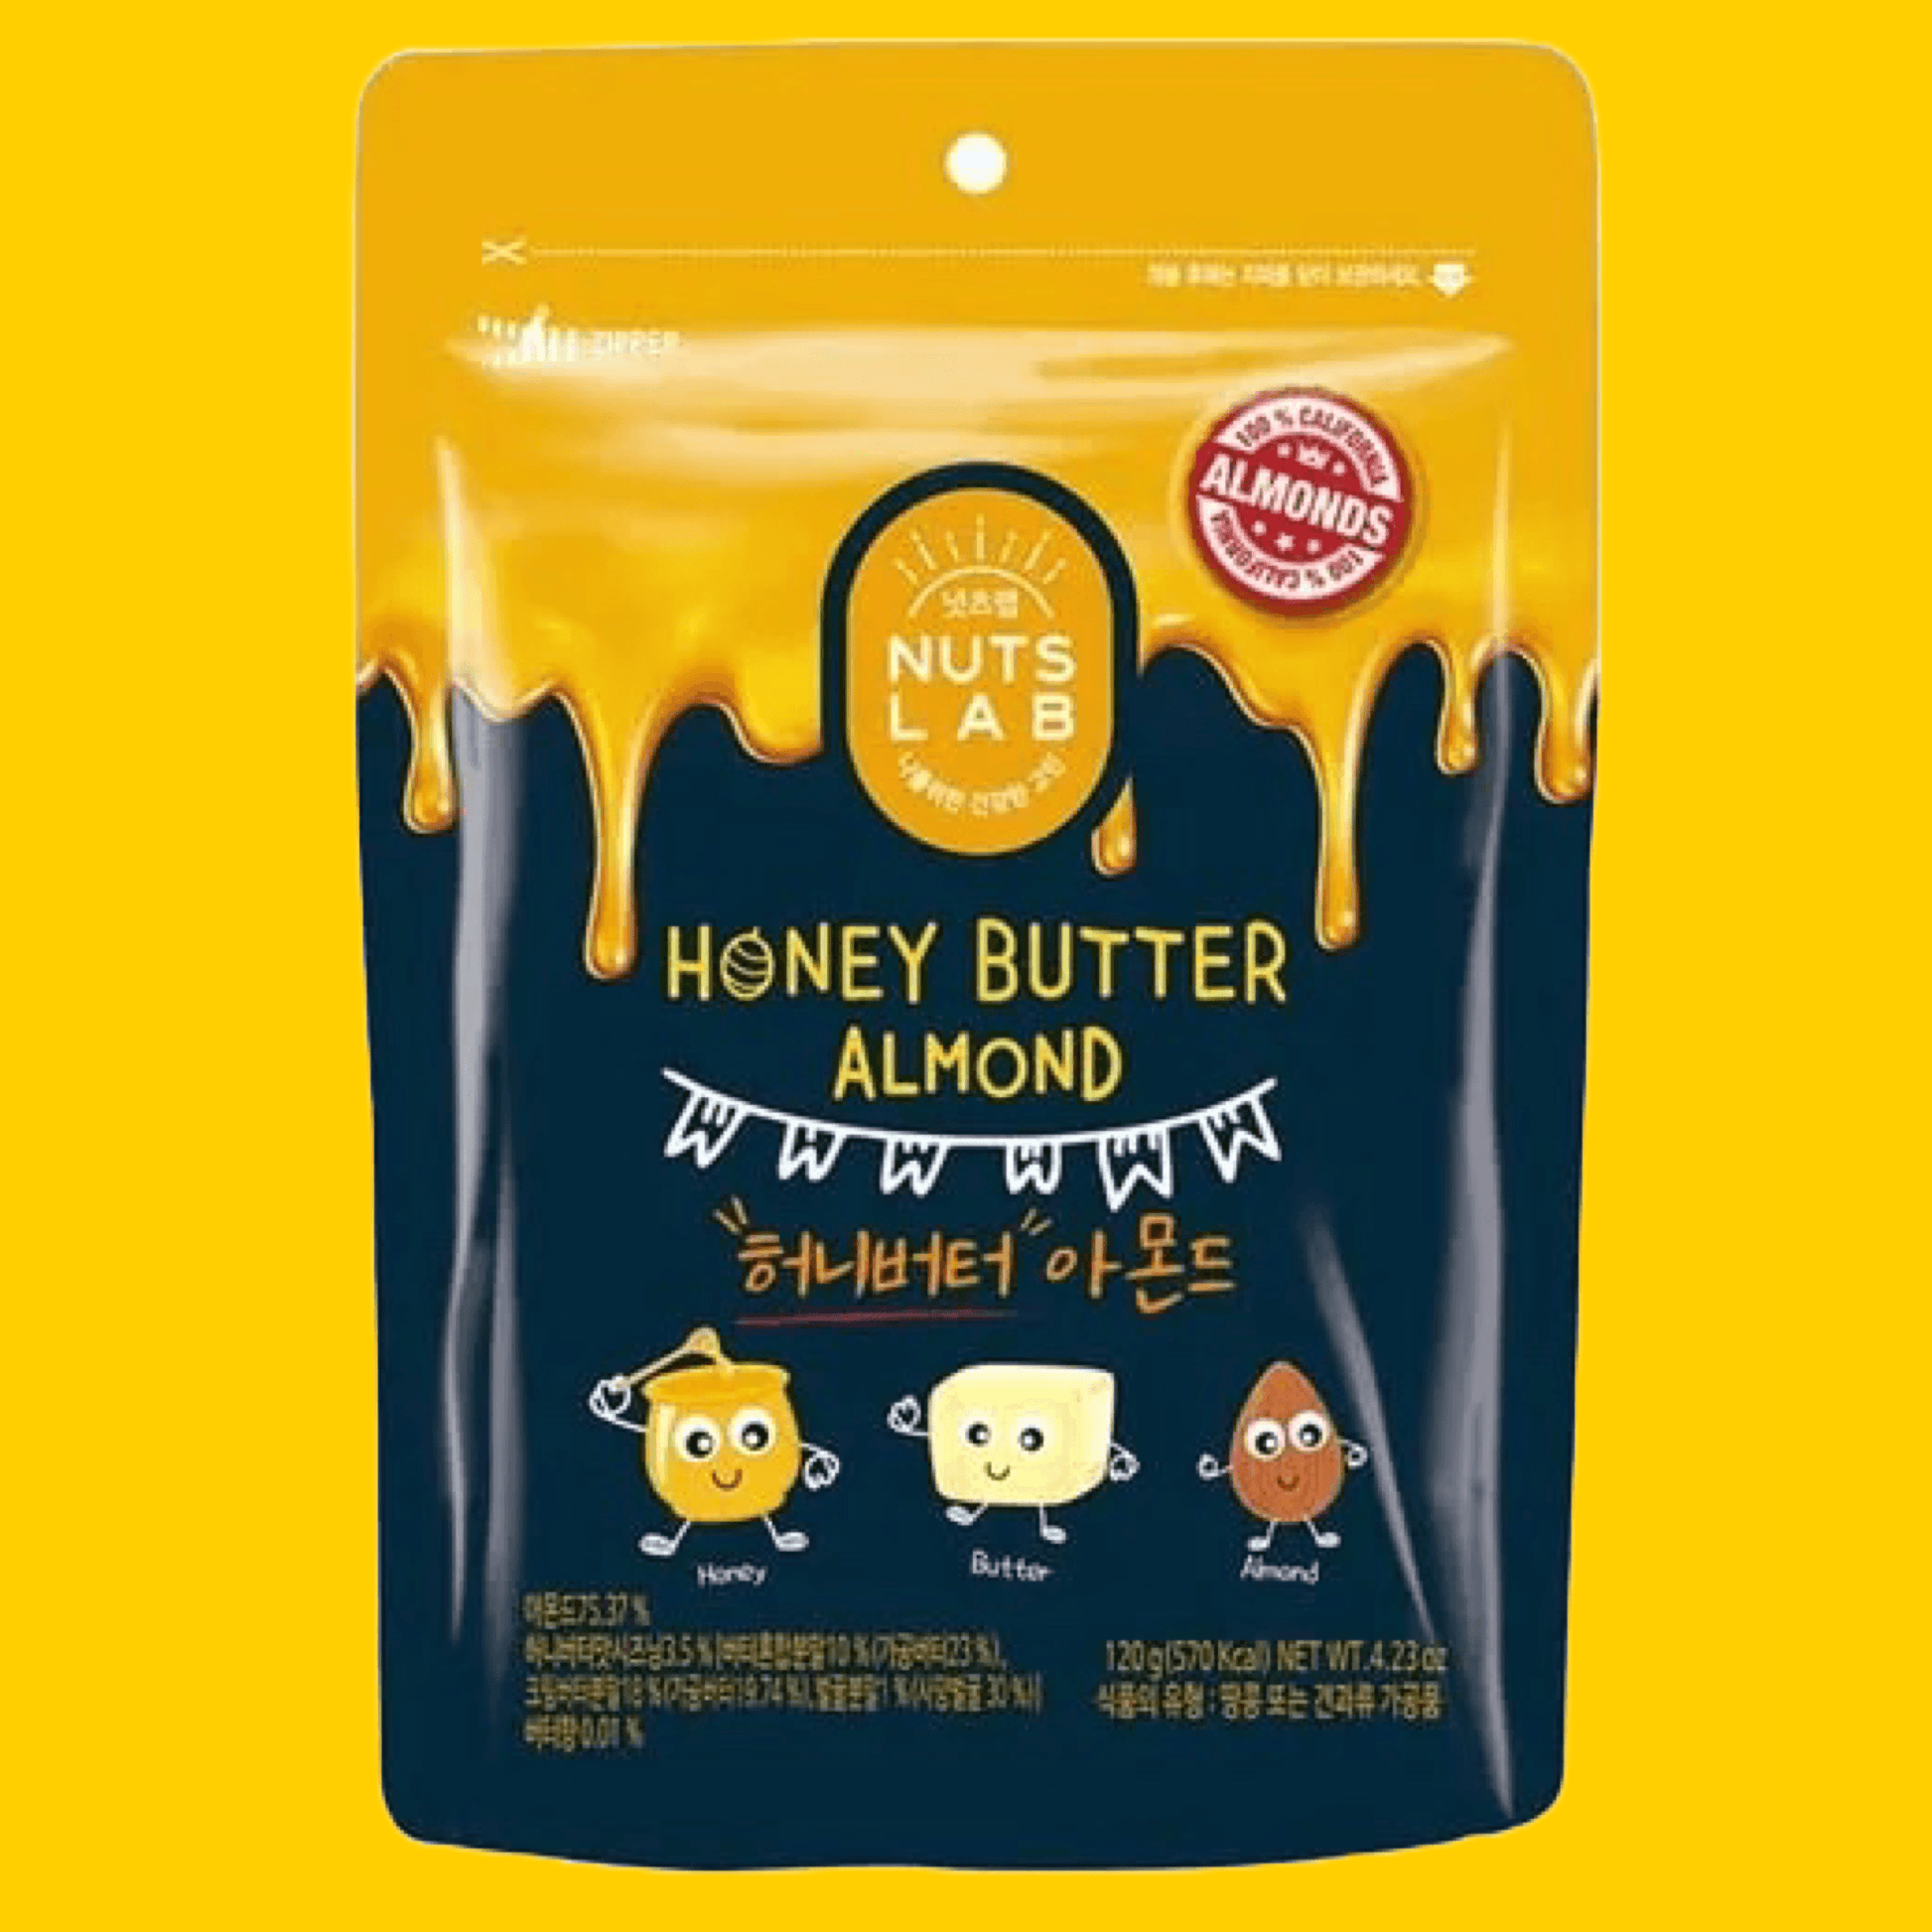 Nuts Lab Honey Butter Almond - The Snacks Box - Asian Snacks Store - The Snacks Box - Korean Snack - Japanese Snack